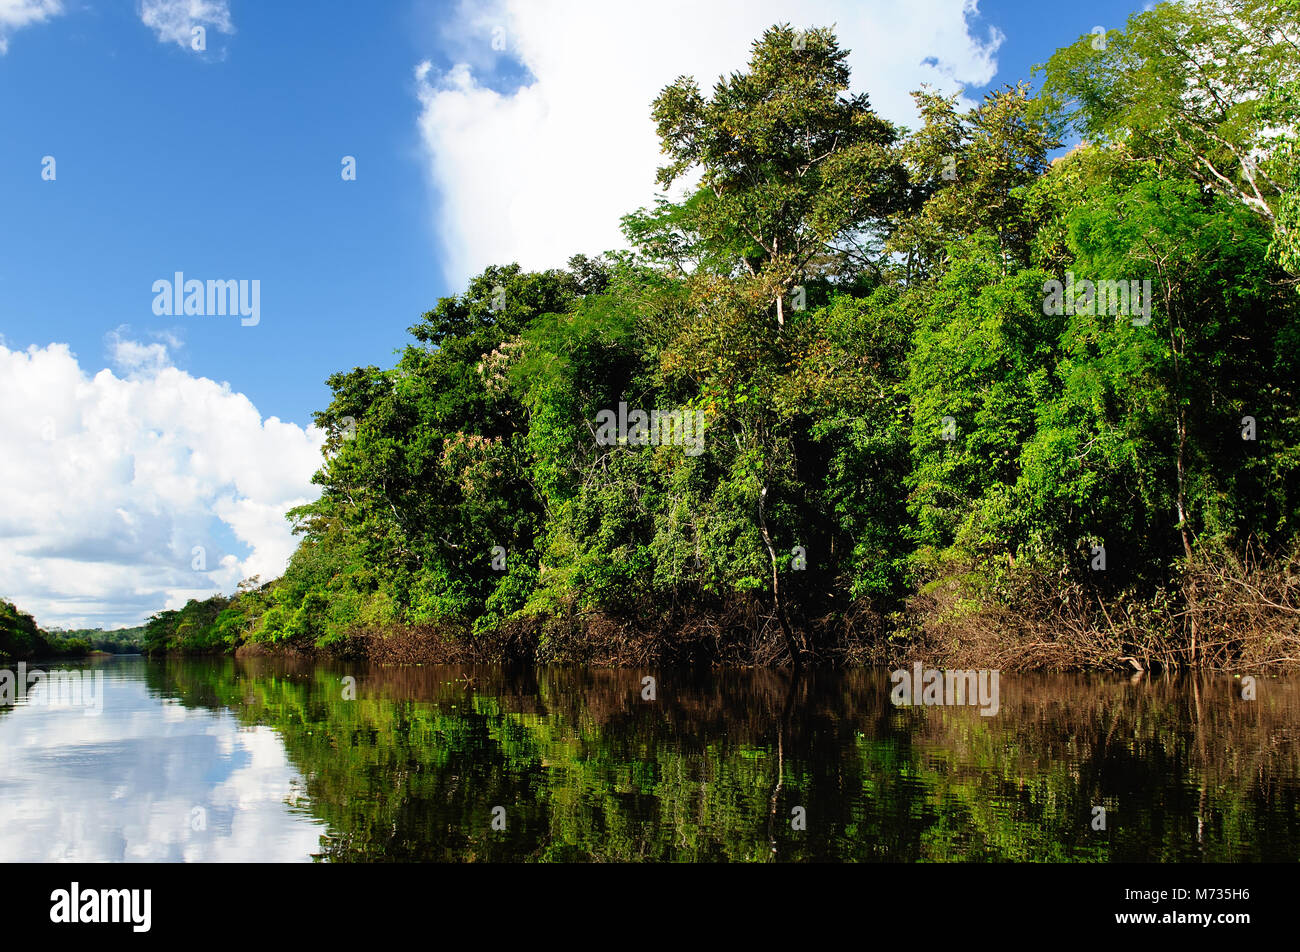 The Amazonian jungle in South America explore on the boat Stock Photo